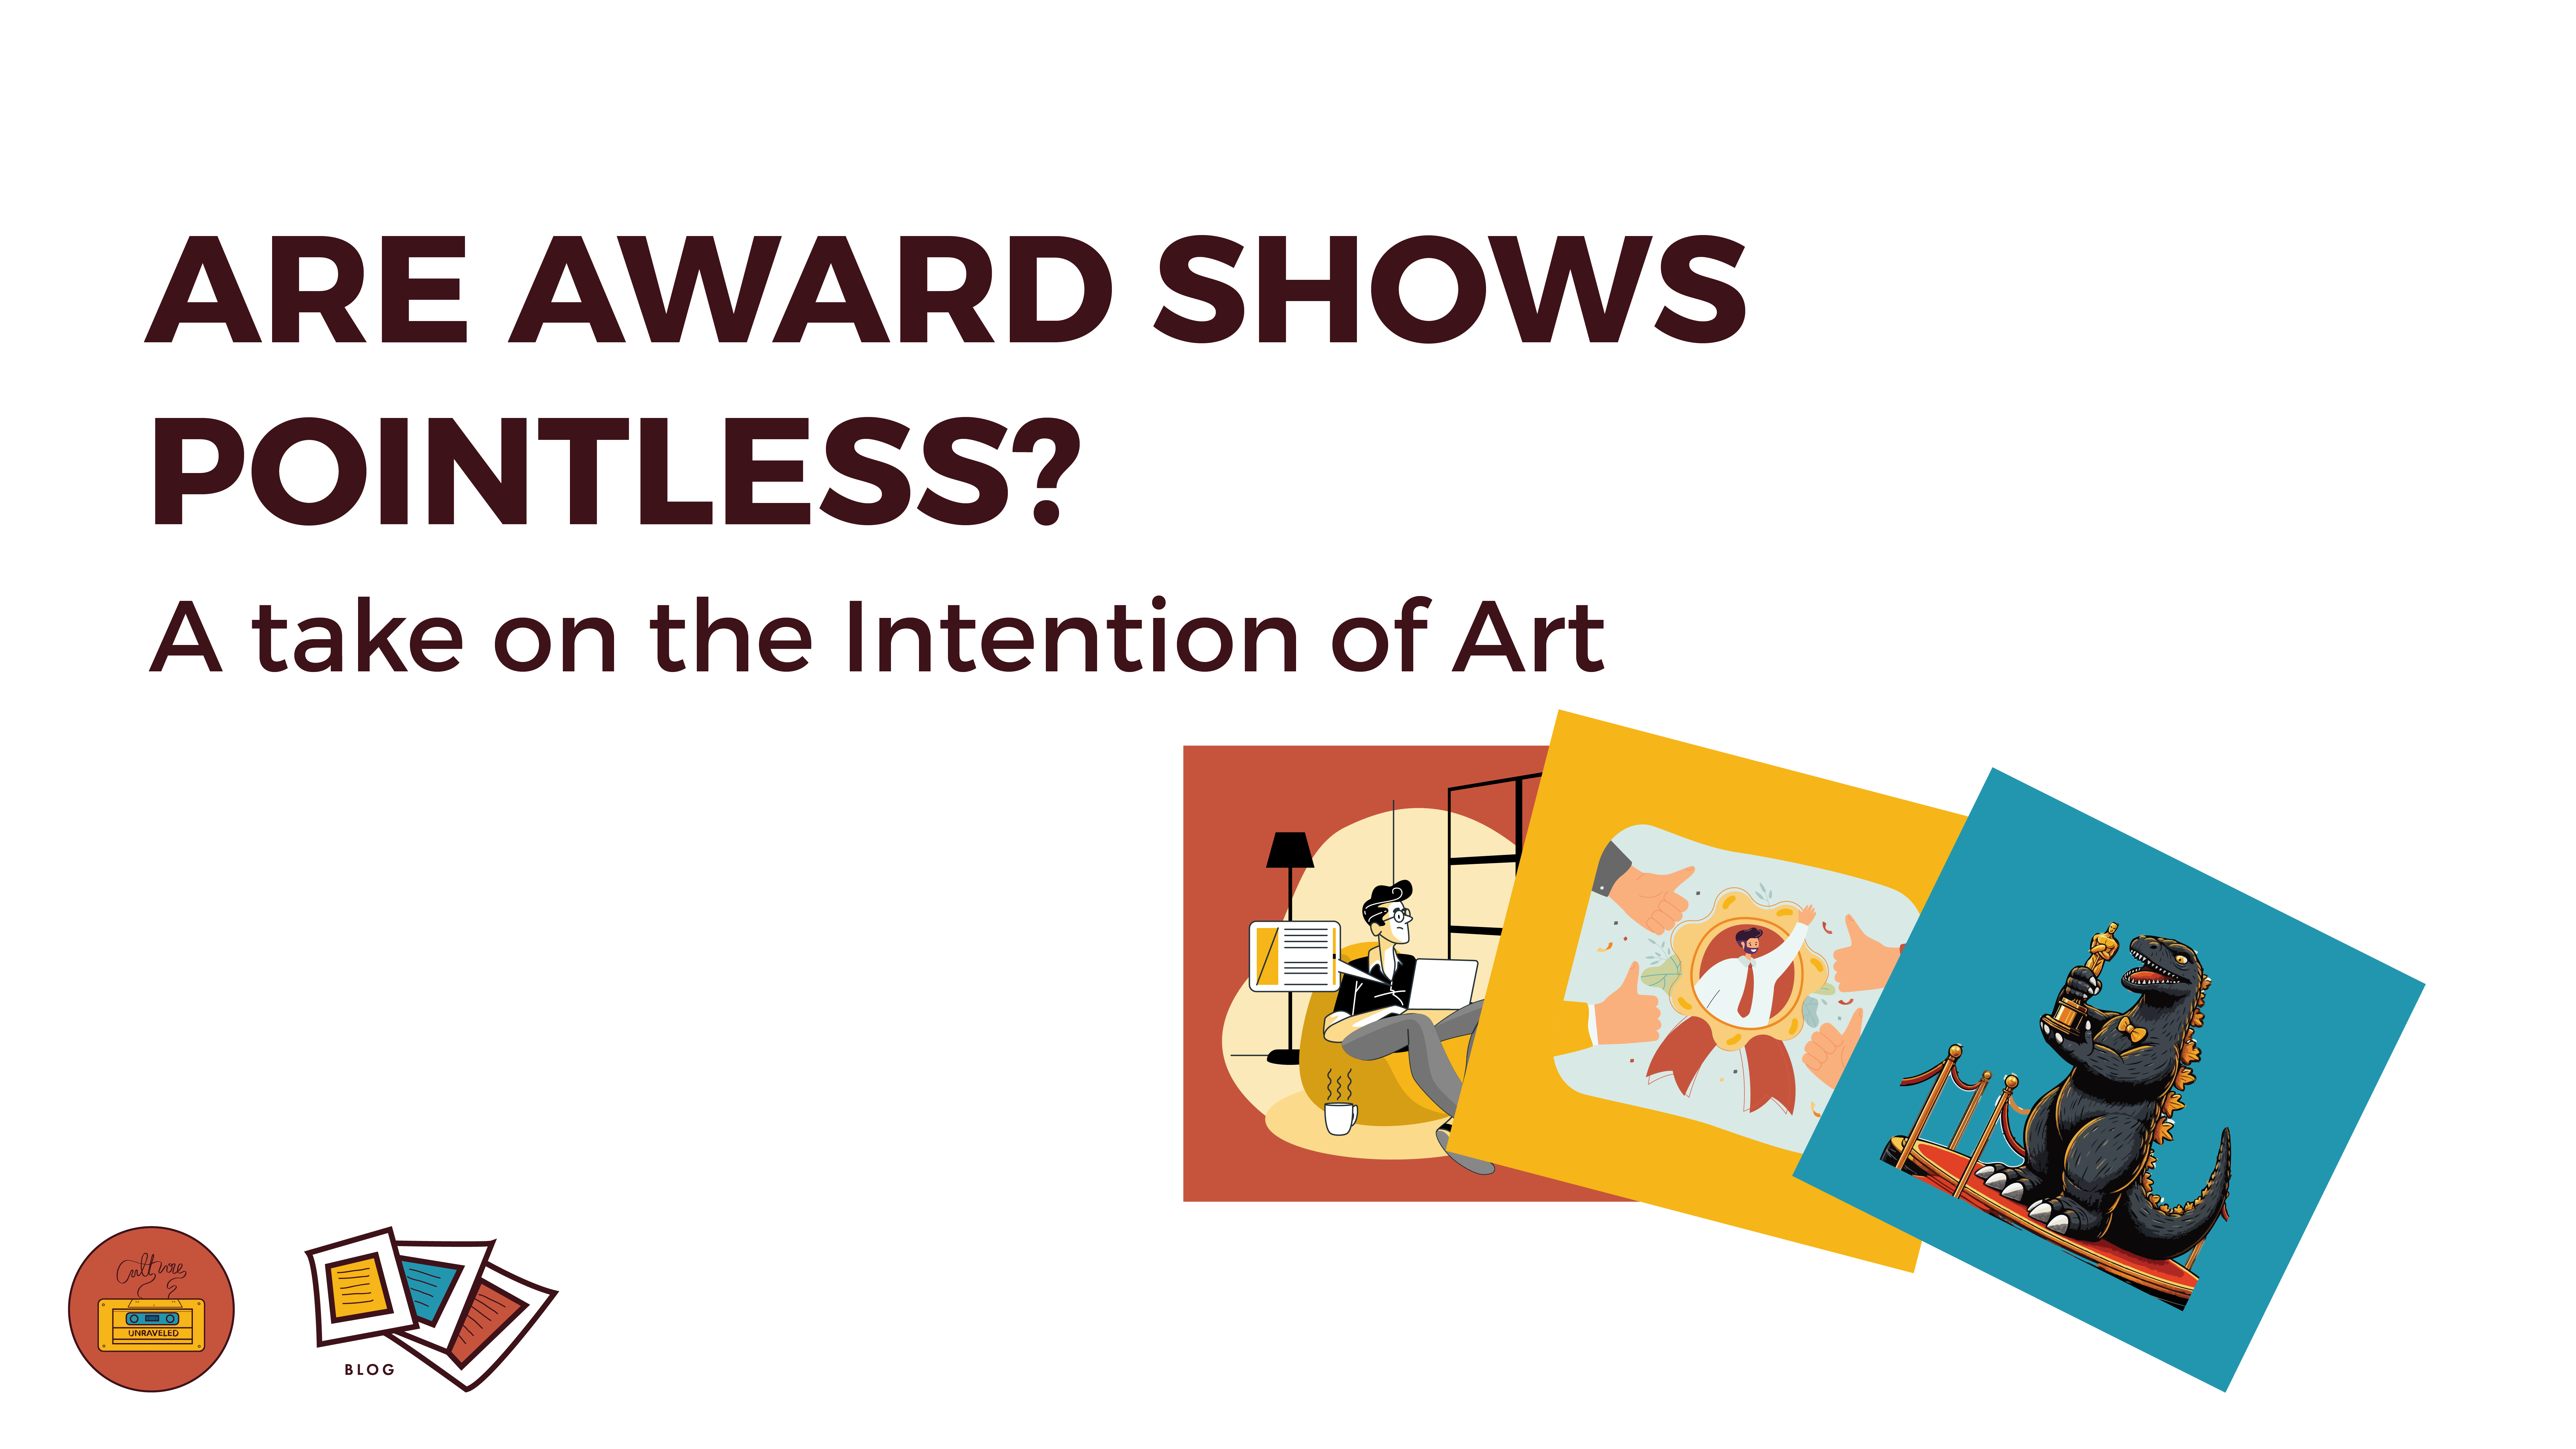 Are Award Shows Pointless? A take on the Intention of Art